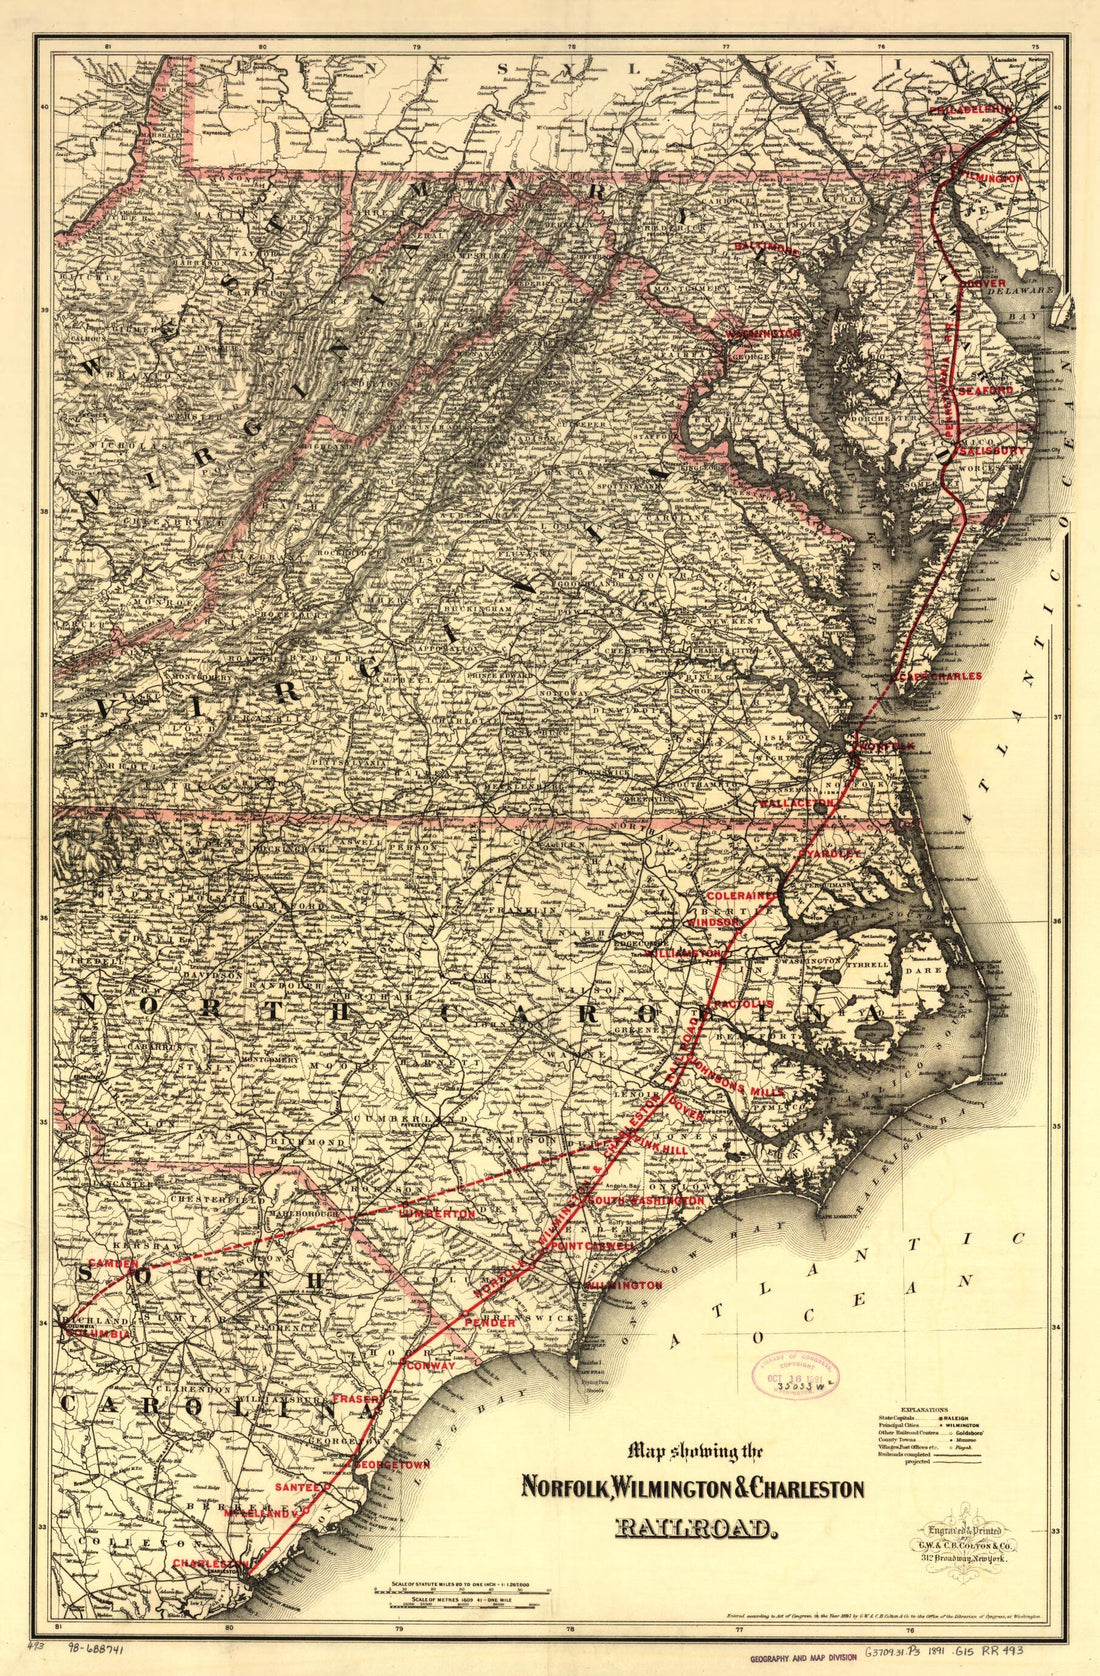 This old map of Map Showing the Norfolk, Wilmington &amp; Charleston Railroad from 1891 was created by  G.W. &amp; C.B. Colton &amp; Co, Wilmington Norfolk in 1891